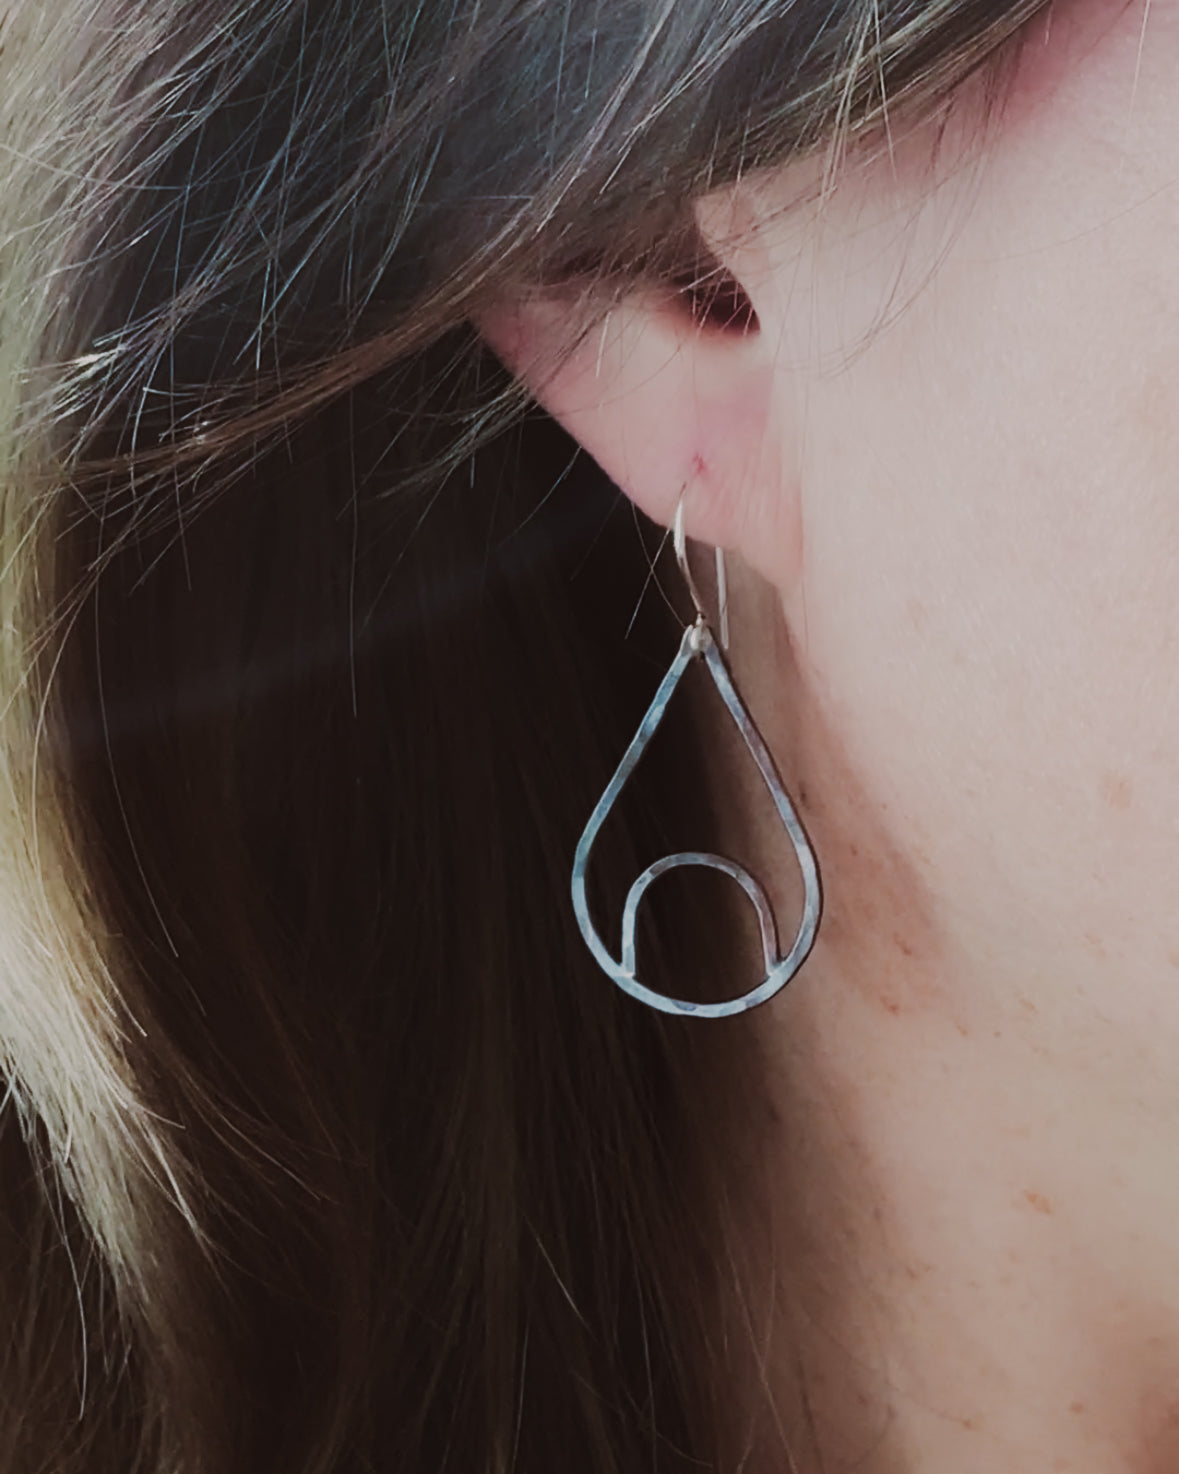 Forged Silhouette Hoop earrings - Luster [ready to ship]